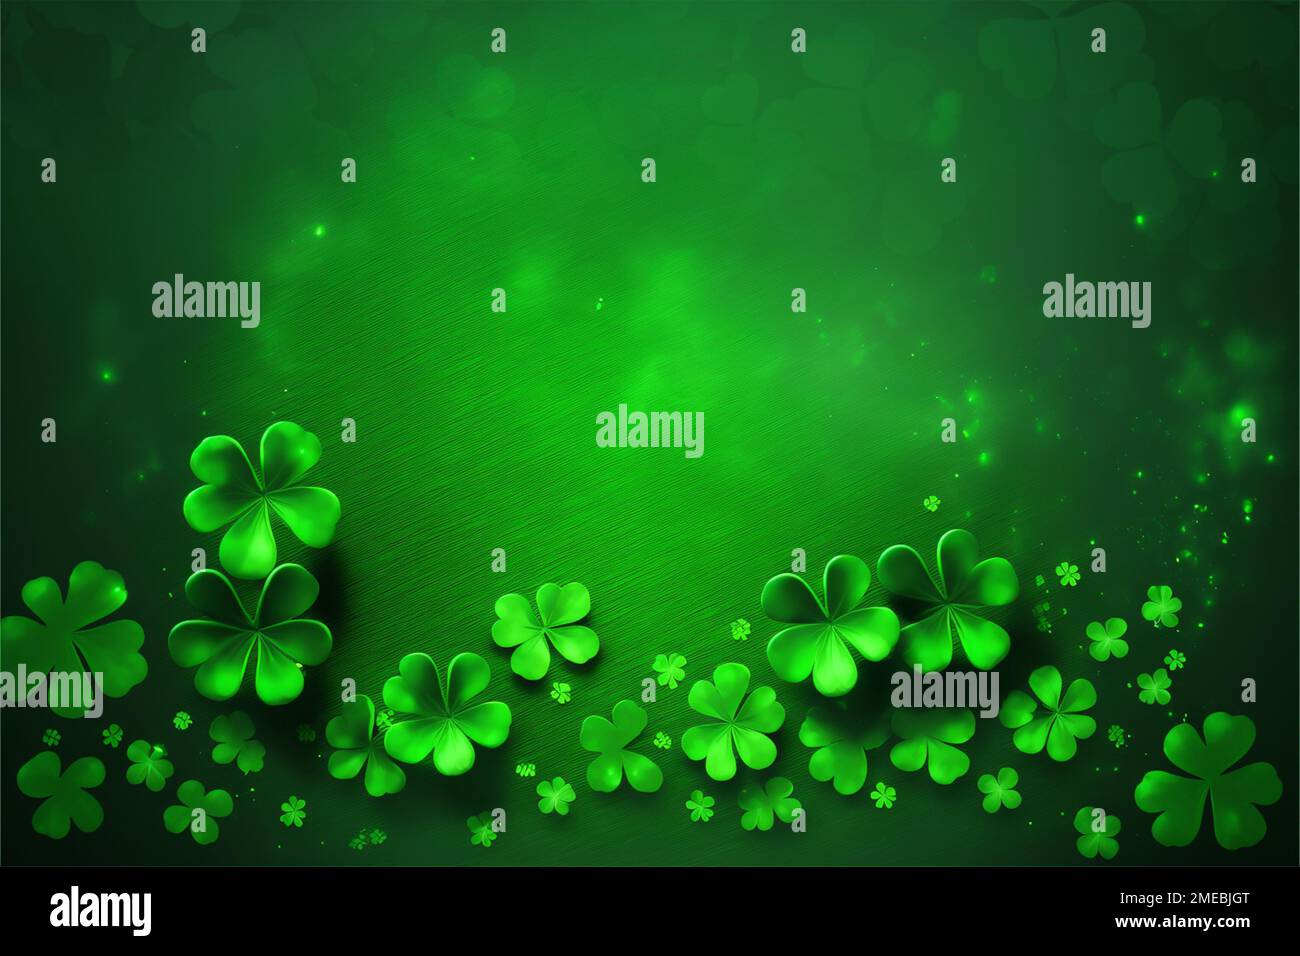 St Patrick's Day Lucky Charm Shamrock Irish abstract green bokeh background for happy st patrick's day celebration background design Stock Photo